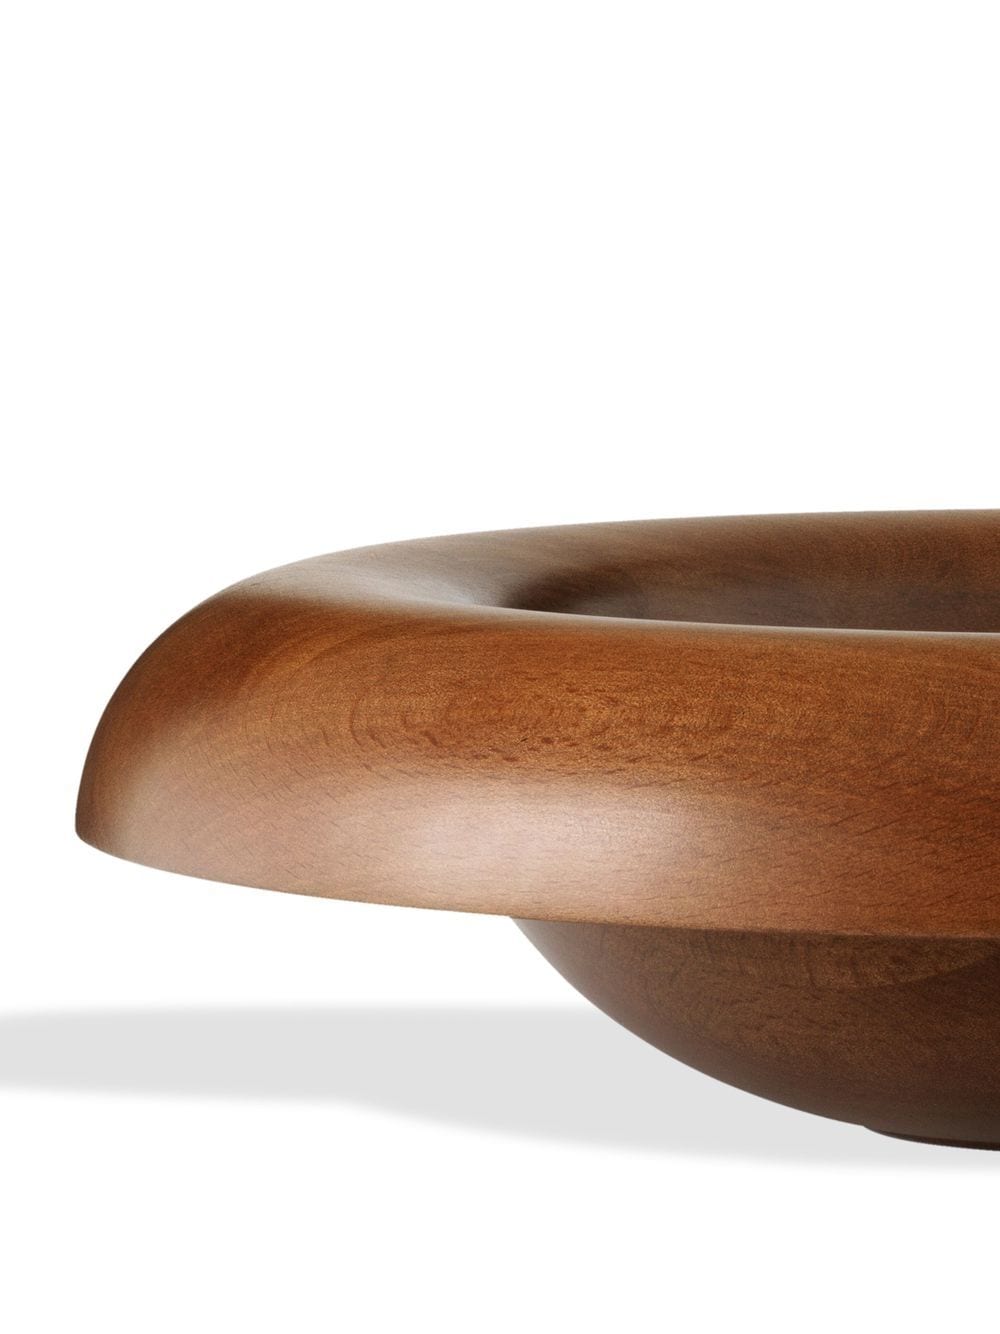 Image 2 of Audo Rond beech wood bowl